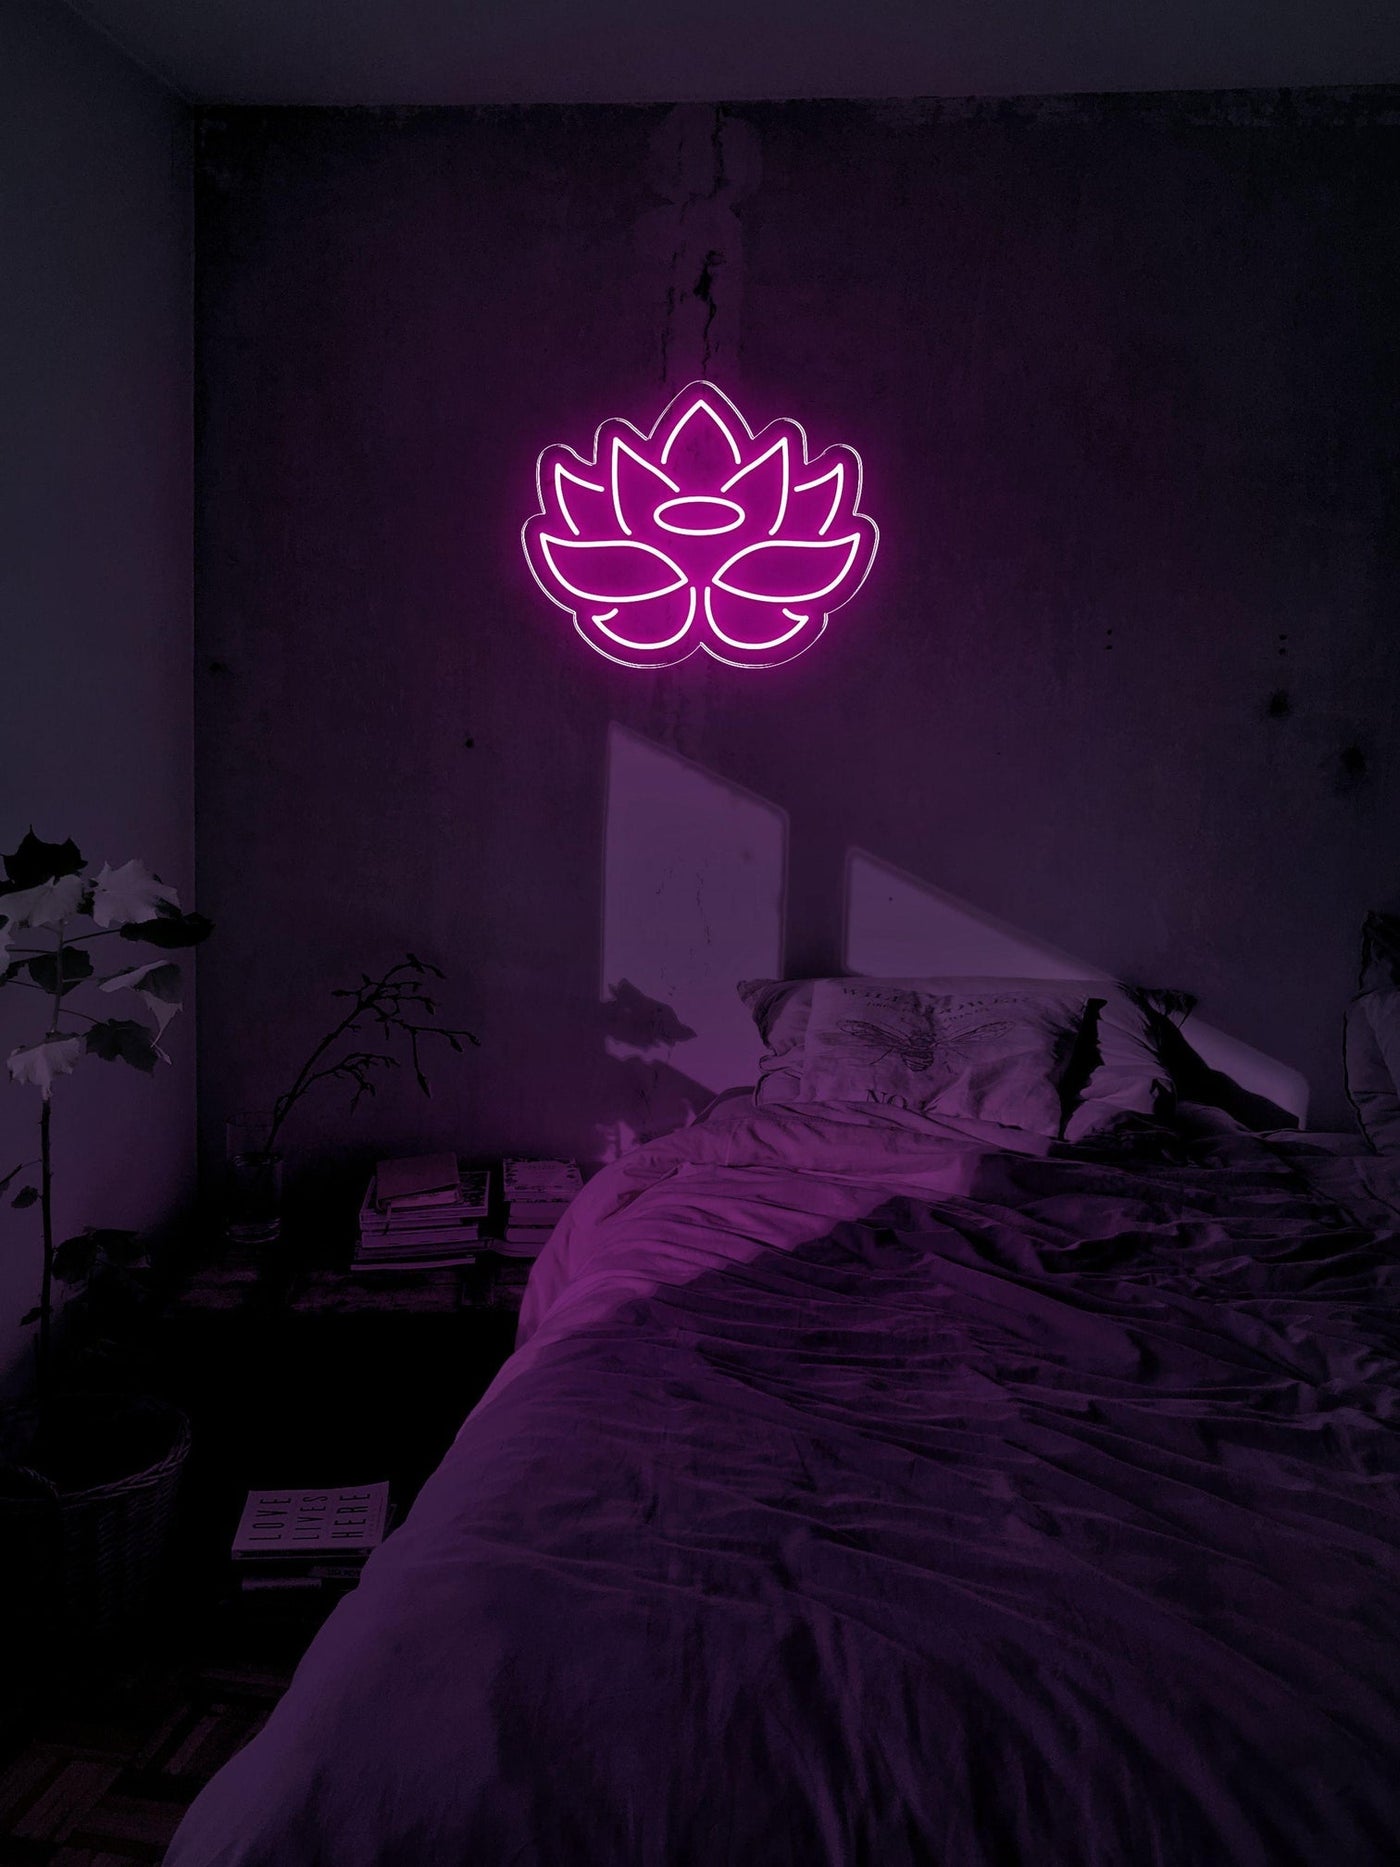 Lotus Flower LED neon sign - 14inch x 11inchHot Pink